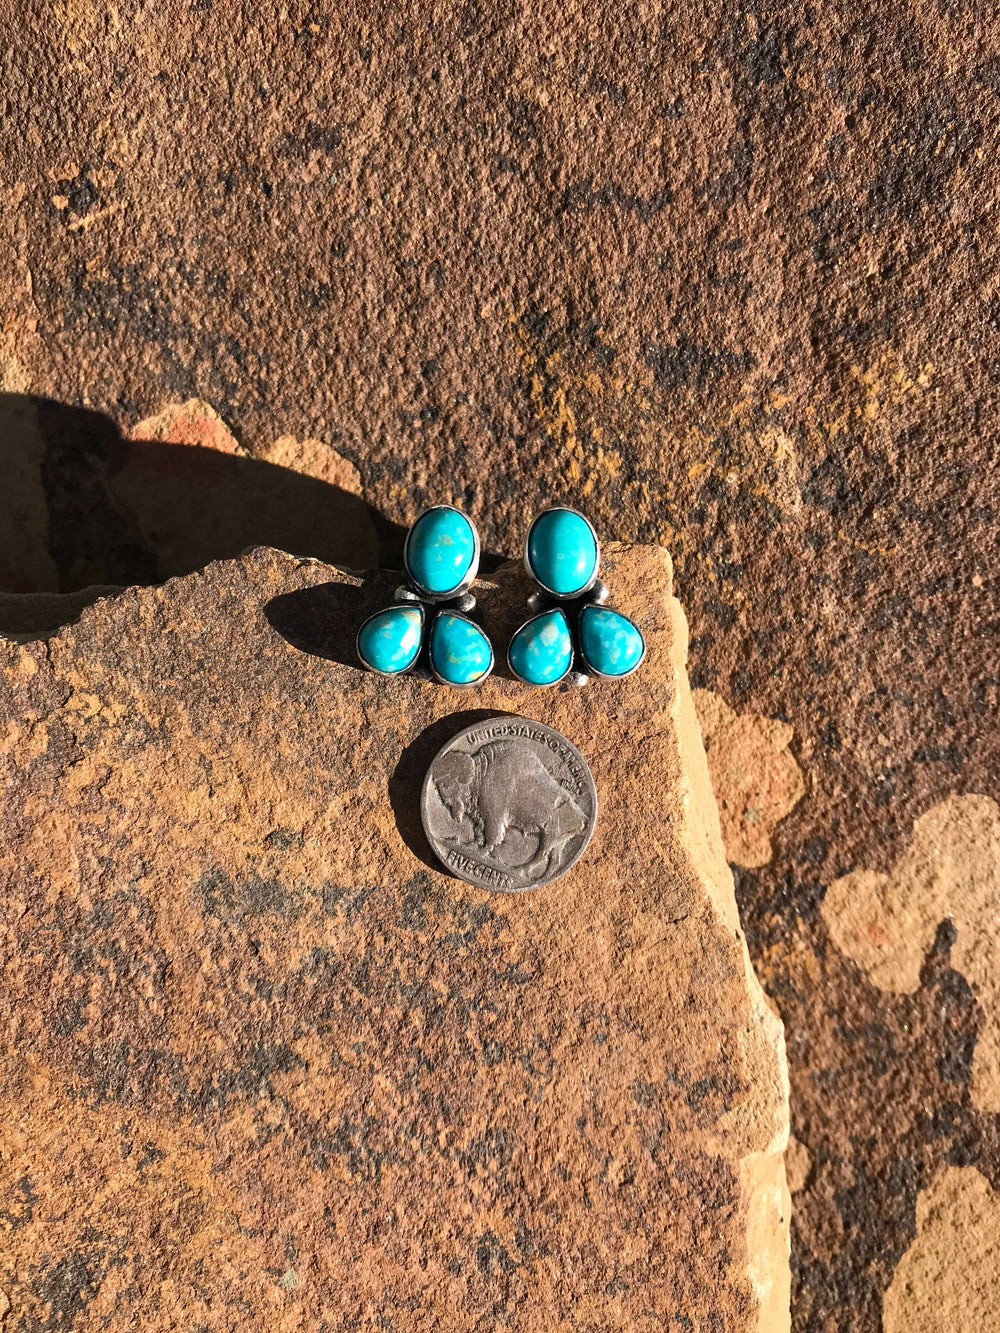 The Journey West Earrings, 6-Earrings-Calli Co., Turquoise and Silver Jewelry, Native American Handmade, Zuni Tribe, Navajo Tribe, Brock Texas